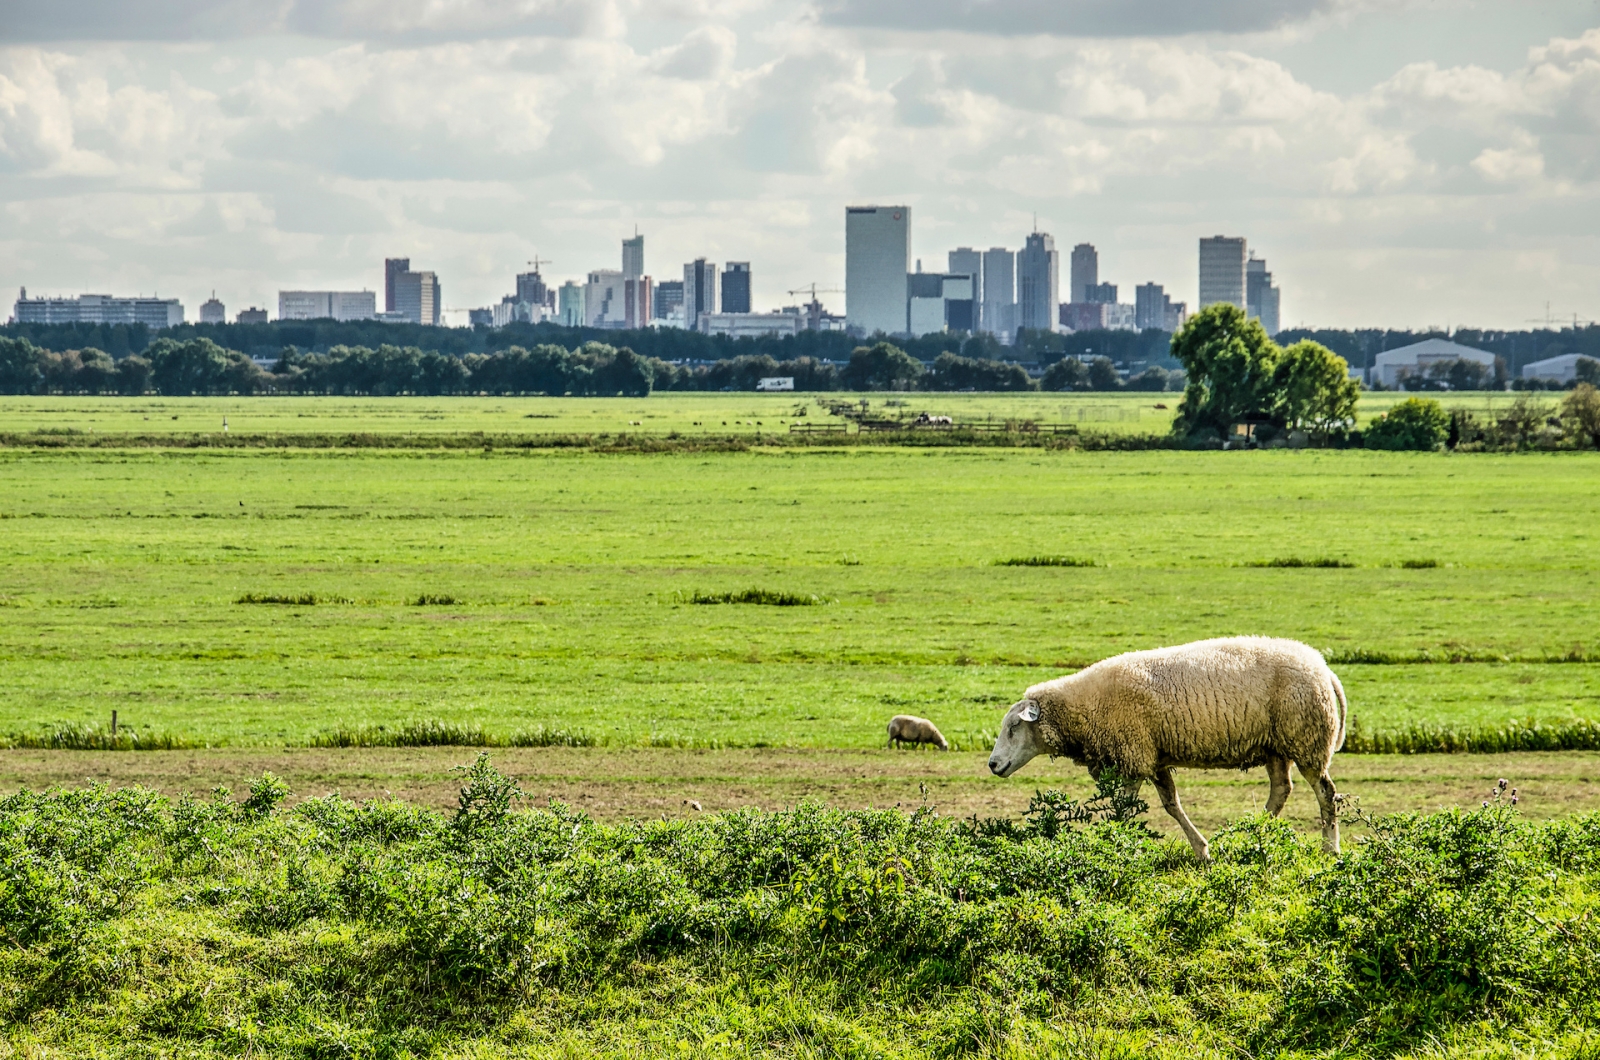 Sheep walking on a dike in a polder just north of Rotterdam, The Netherlands with the city's skyline in the distance